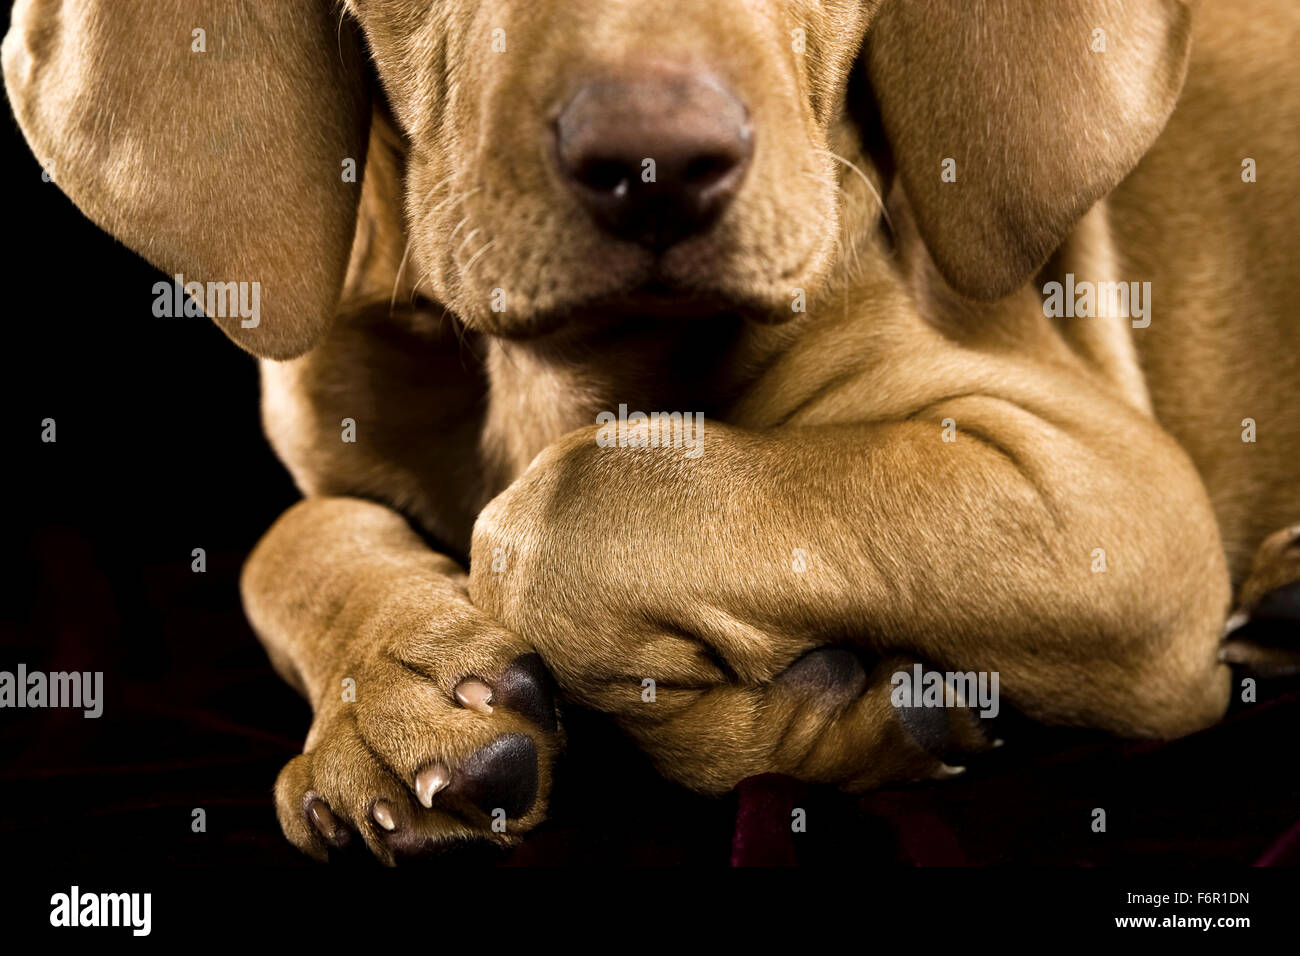 close up portrait Vizsla puppy dog facing camera in studio on black paws front legs on folded under muzzle nose long floppy ears Stock Photo